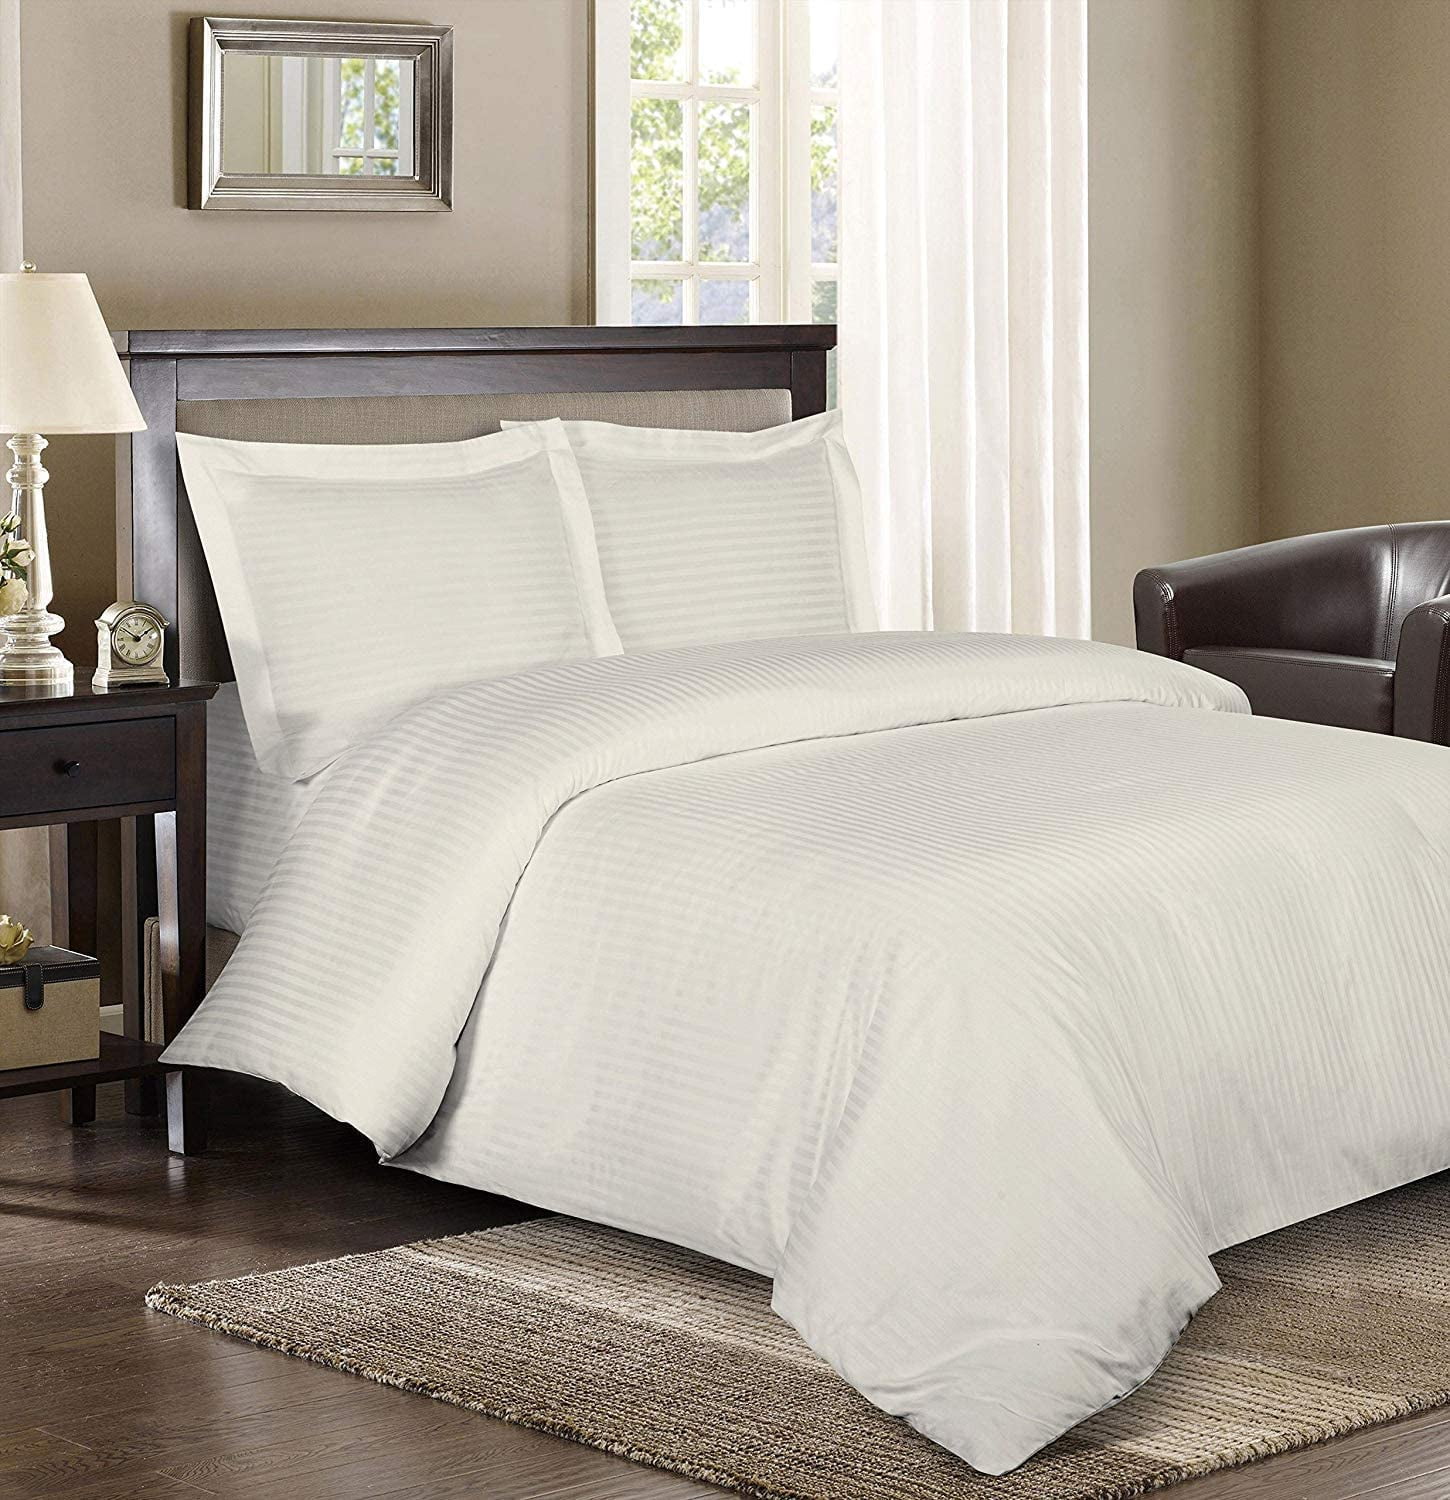 1200TC Soft Egyptian Cotton All Bedding Items Full Size New Color Solid/Striped 